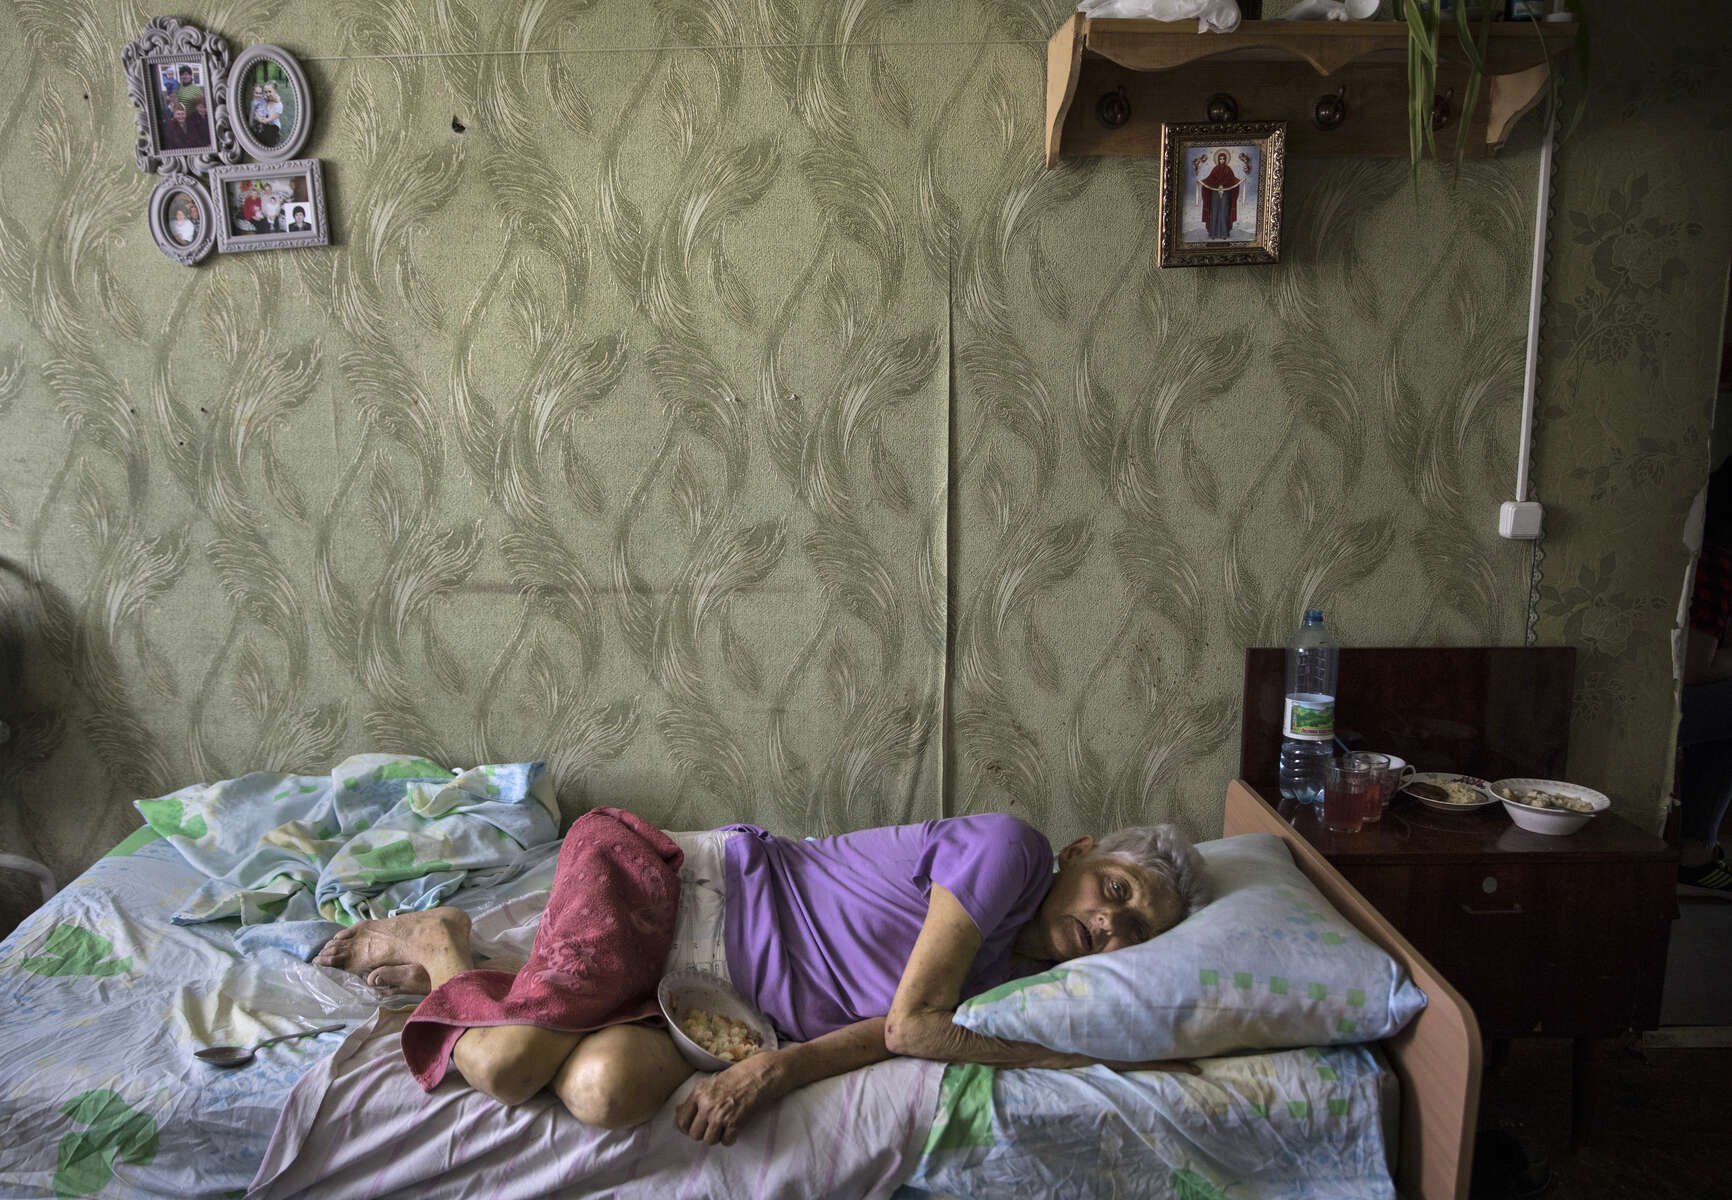 Valentina Iosipovna, age 76 lays in bed waiting for staff to feed her at the Druzhkovka nursing home. 